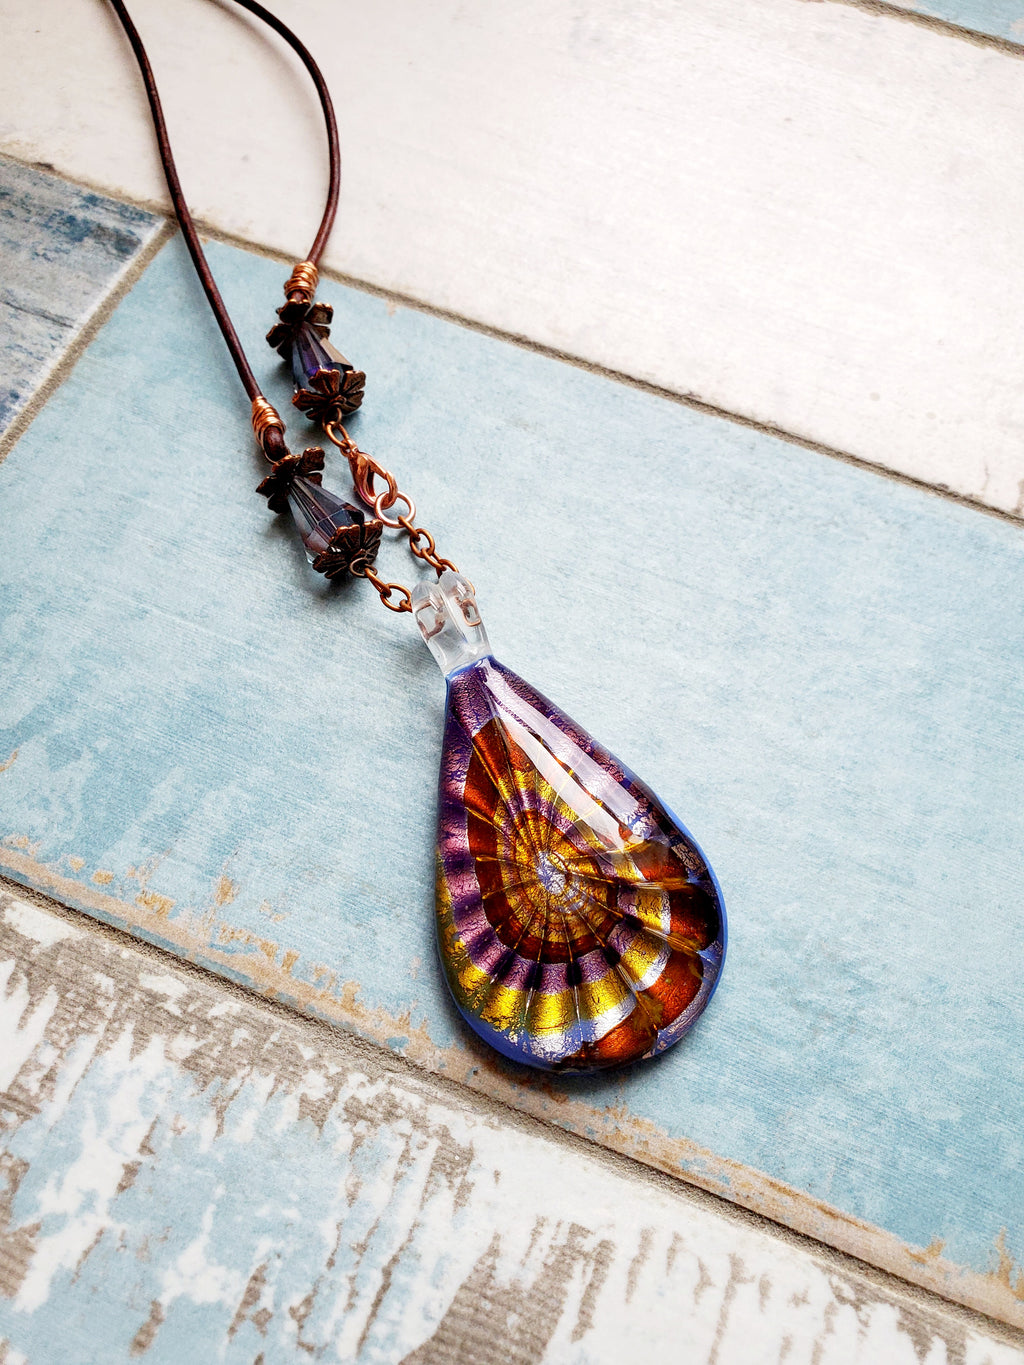 Dichronic Glass Necklace